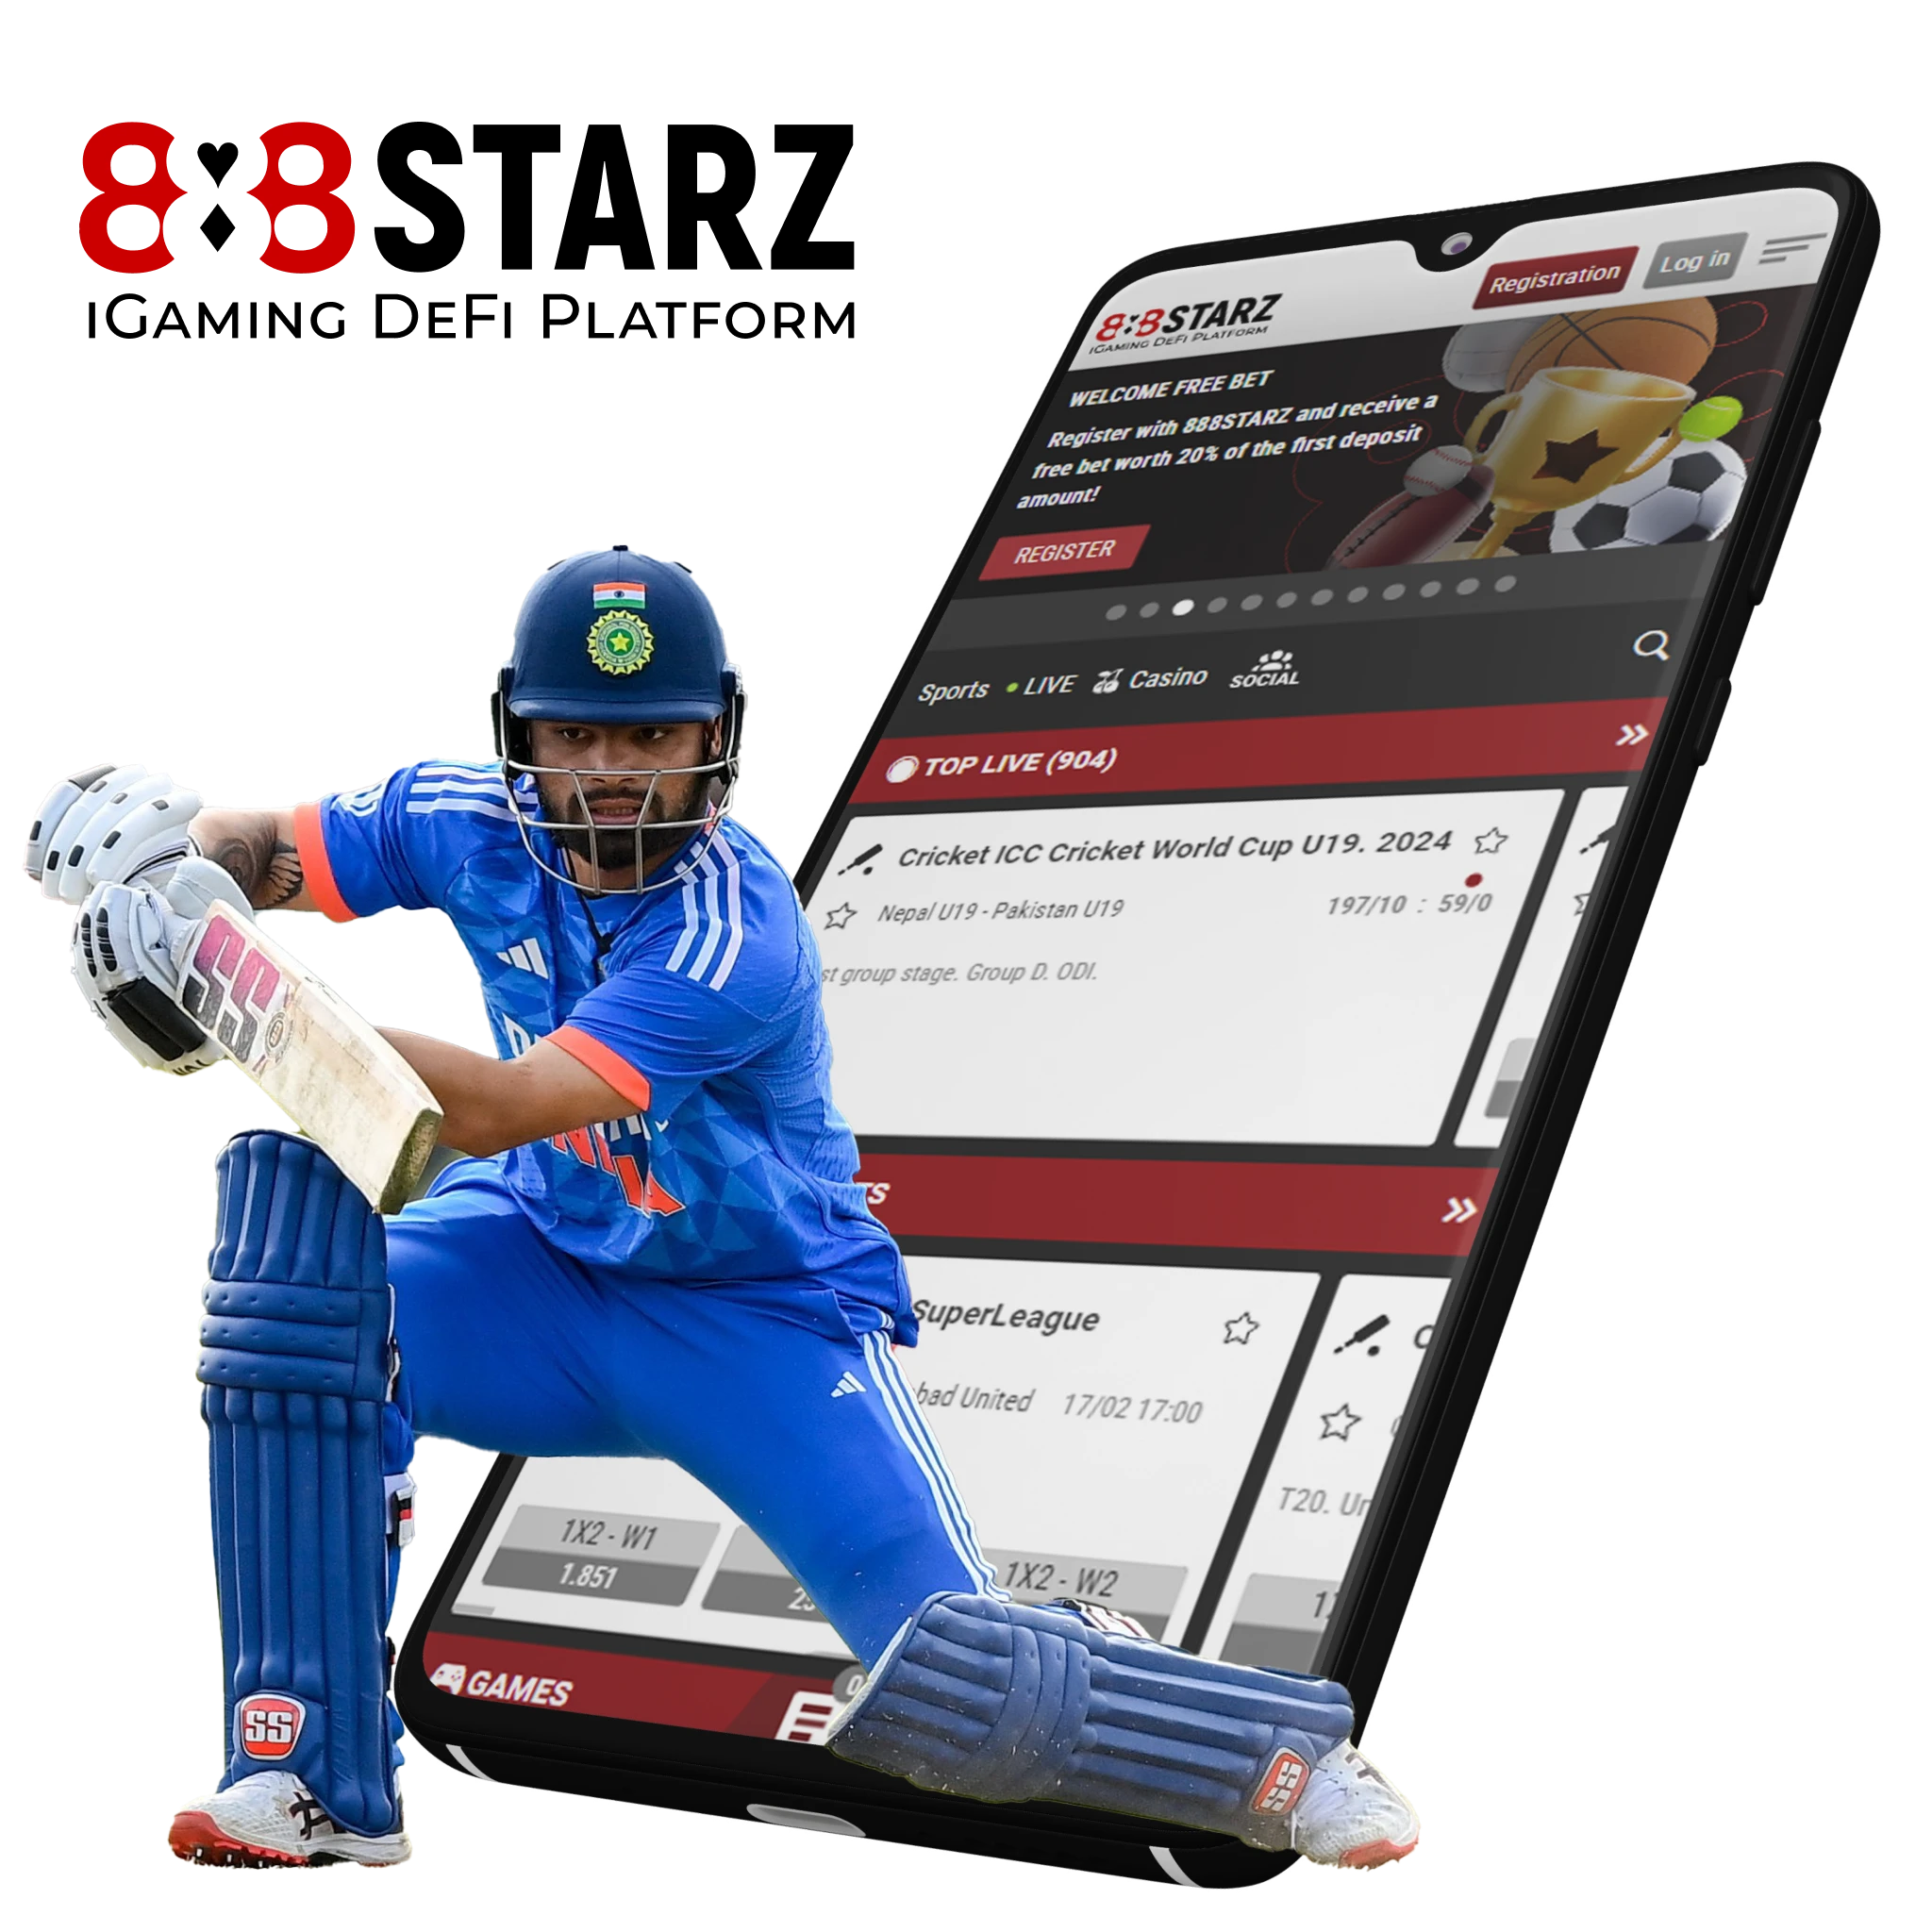 The 888starz app offers a wide range of betting markets, competitive odds, ensuring that users can stay updated and engaged with IPL matches.